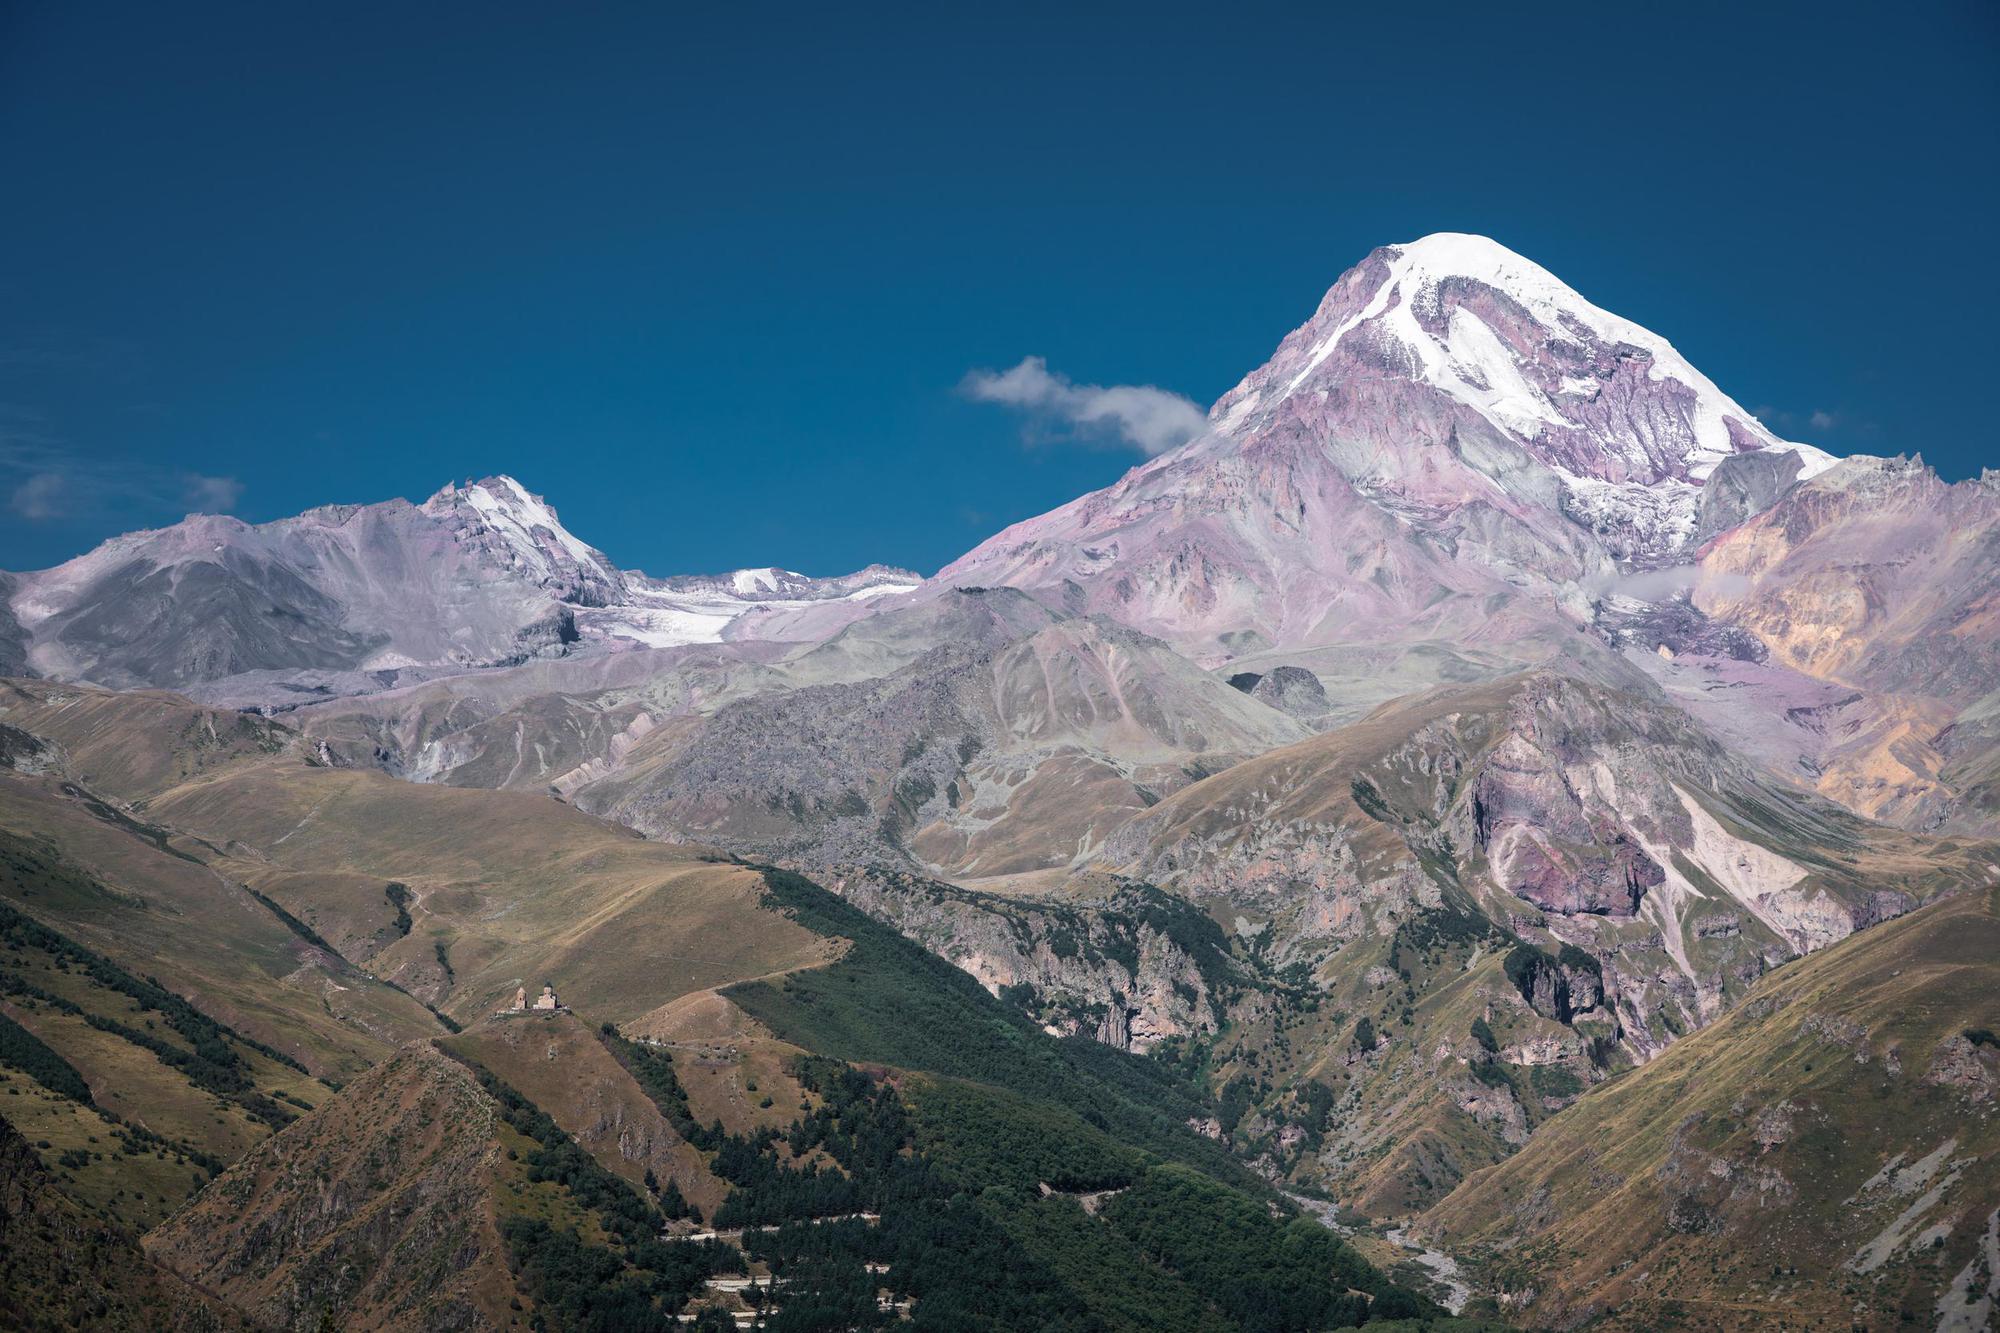 Climb to the Summit of the Majestic Caucasus Crown Jewel